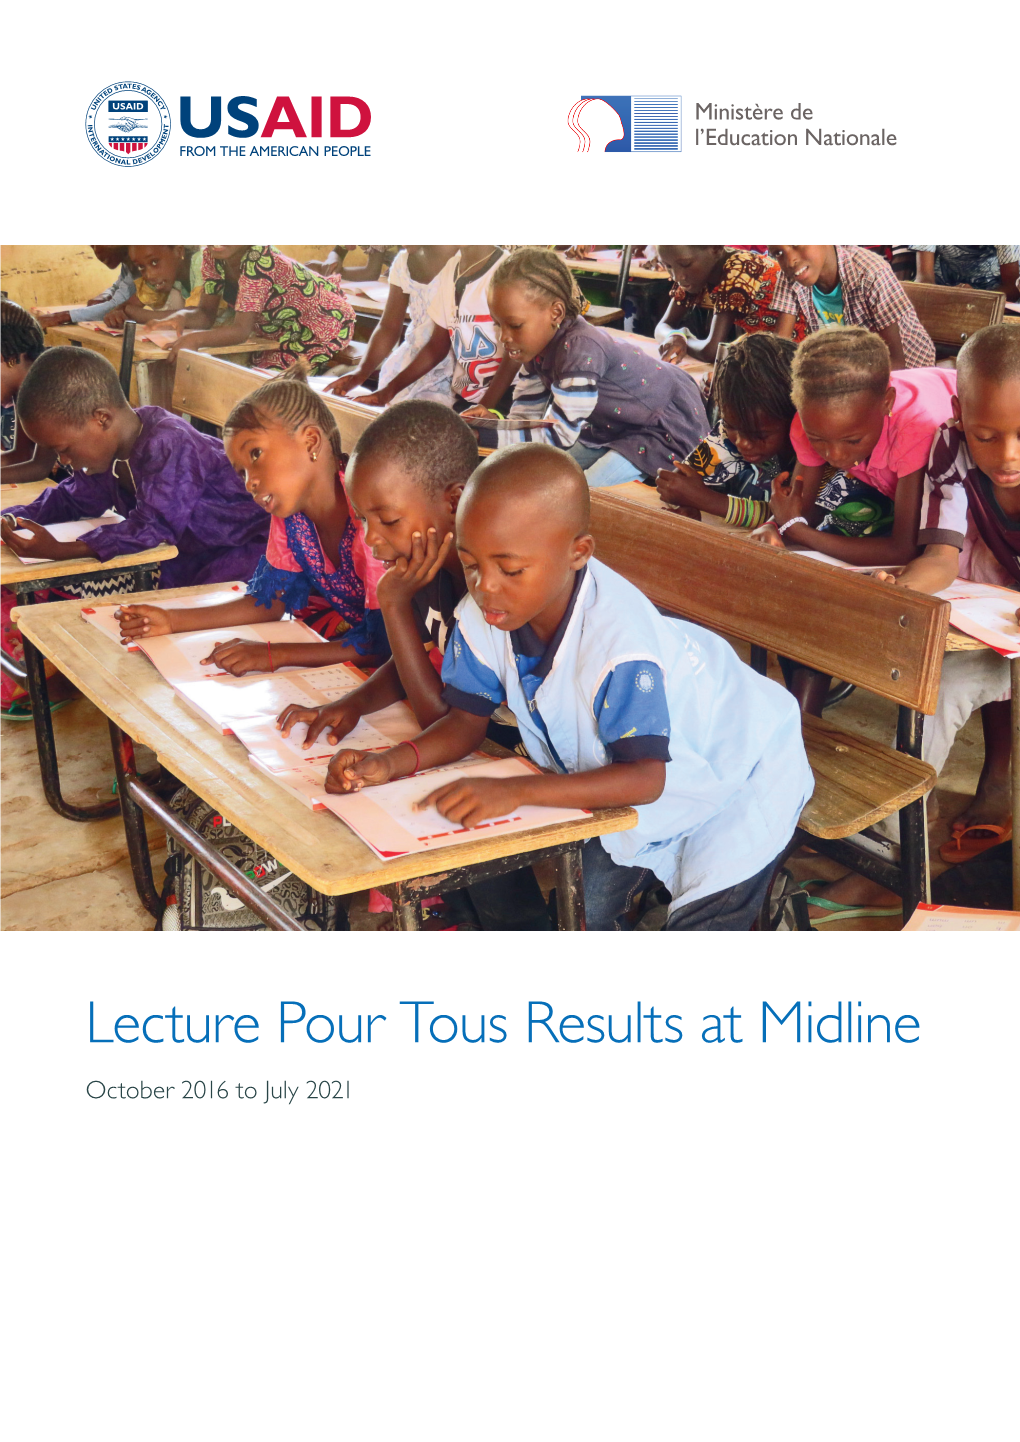 Lecture Pour Tous Early Grade Reading Assessment Midline Results